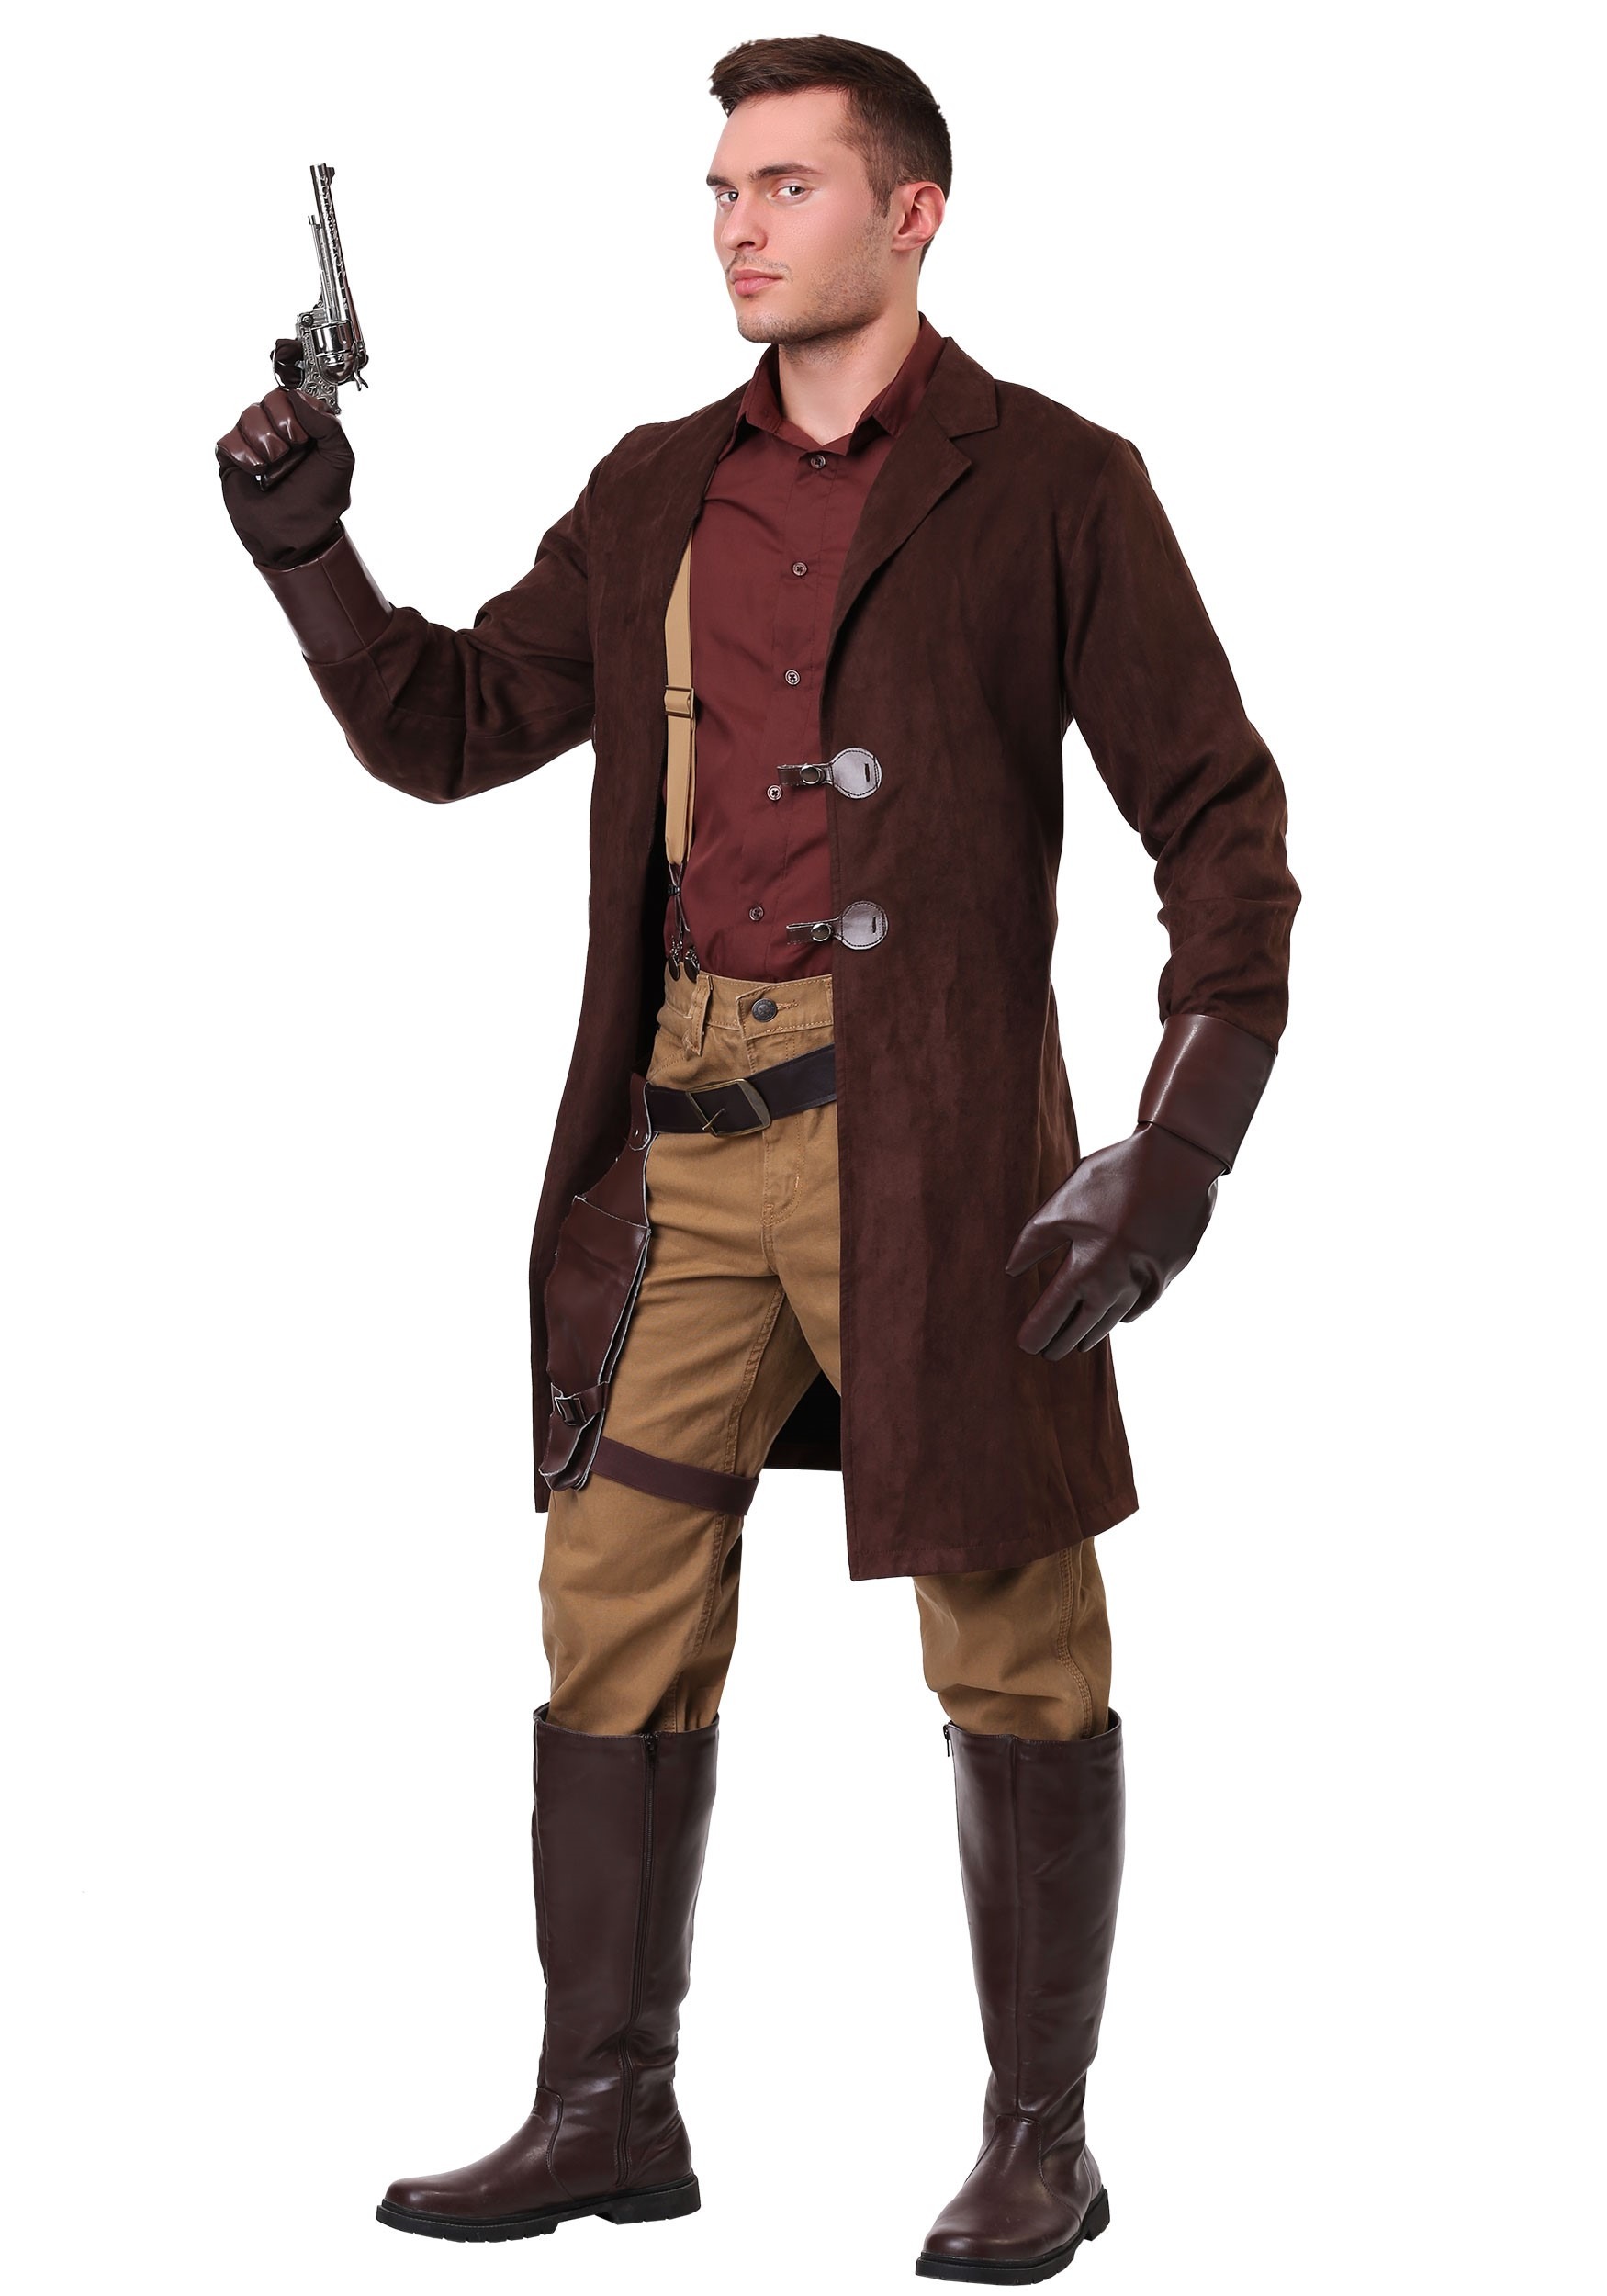 Image of Firefly Malcolm Reynolds Costume for Men ID FUN6955AD-M